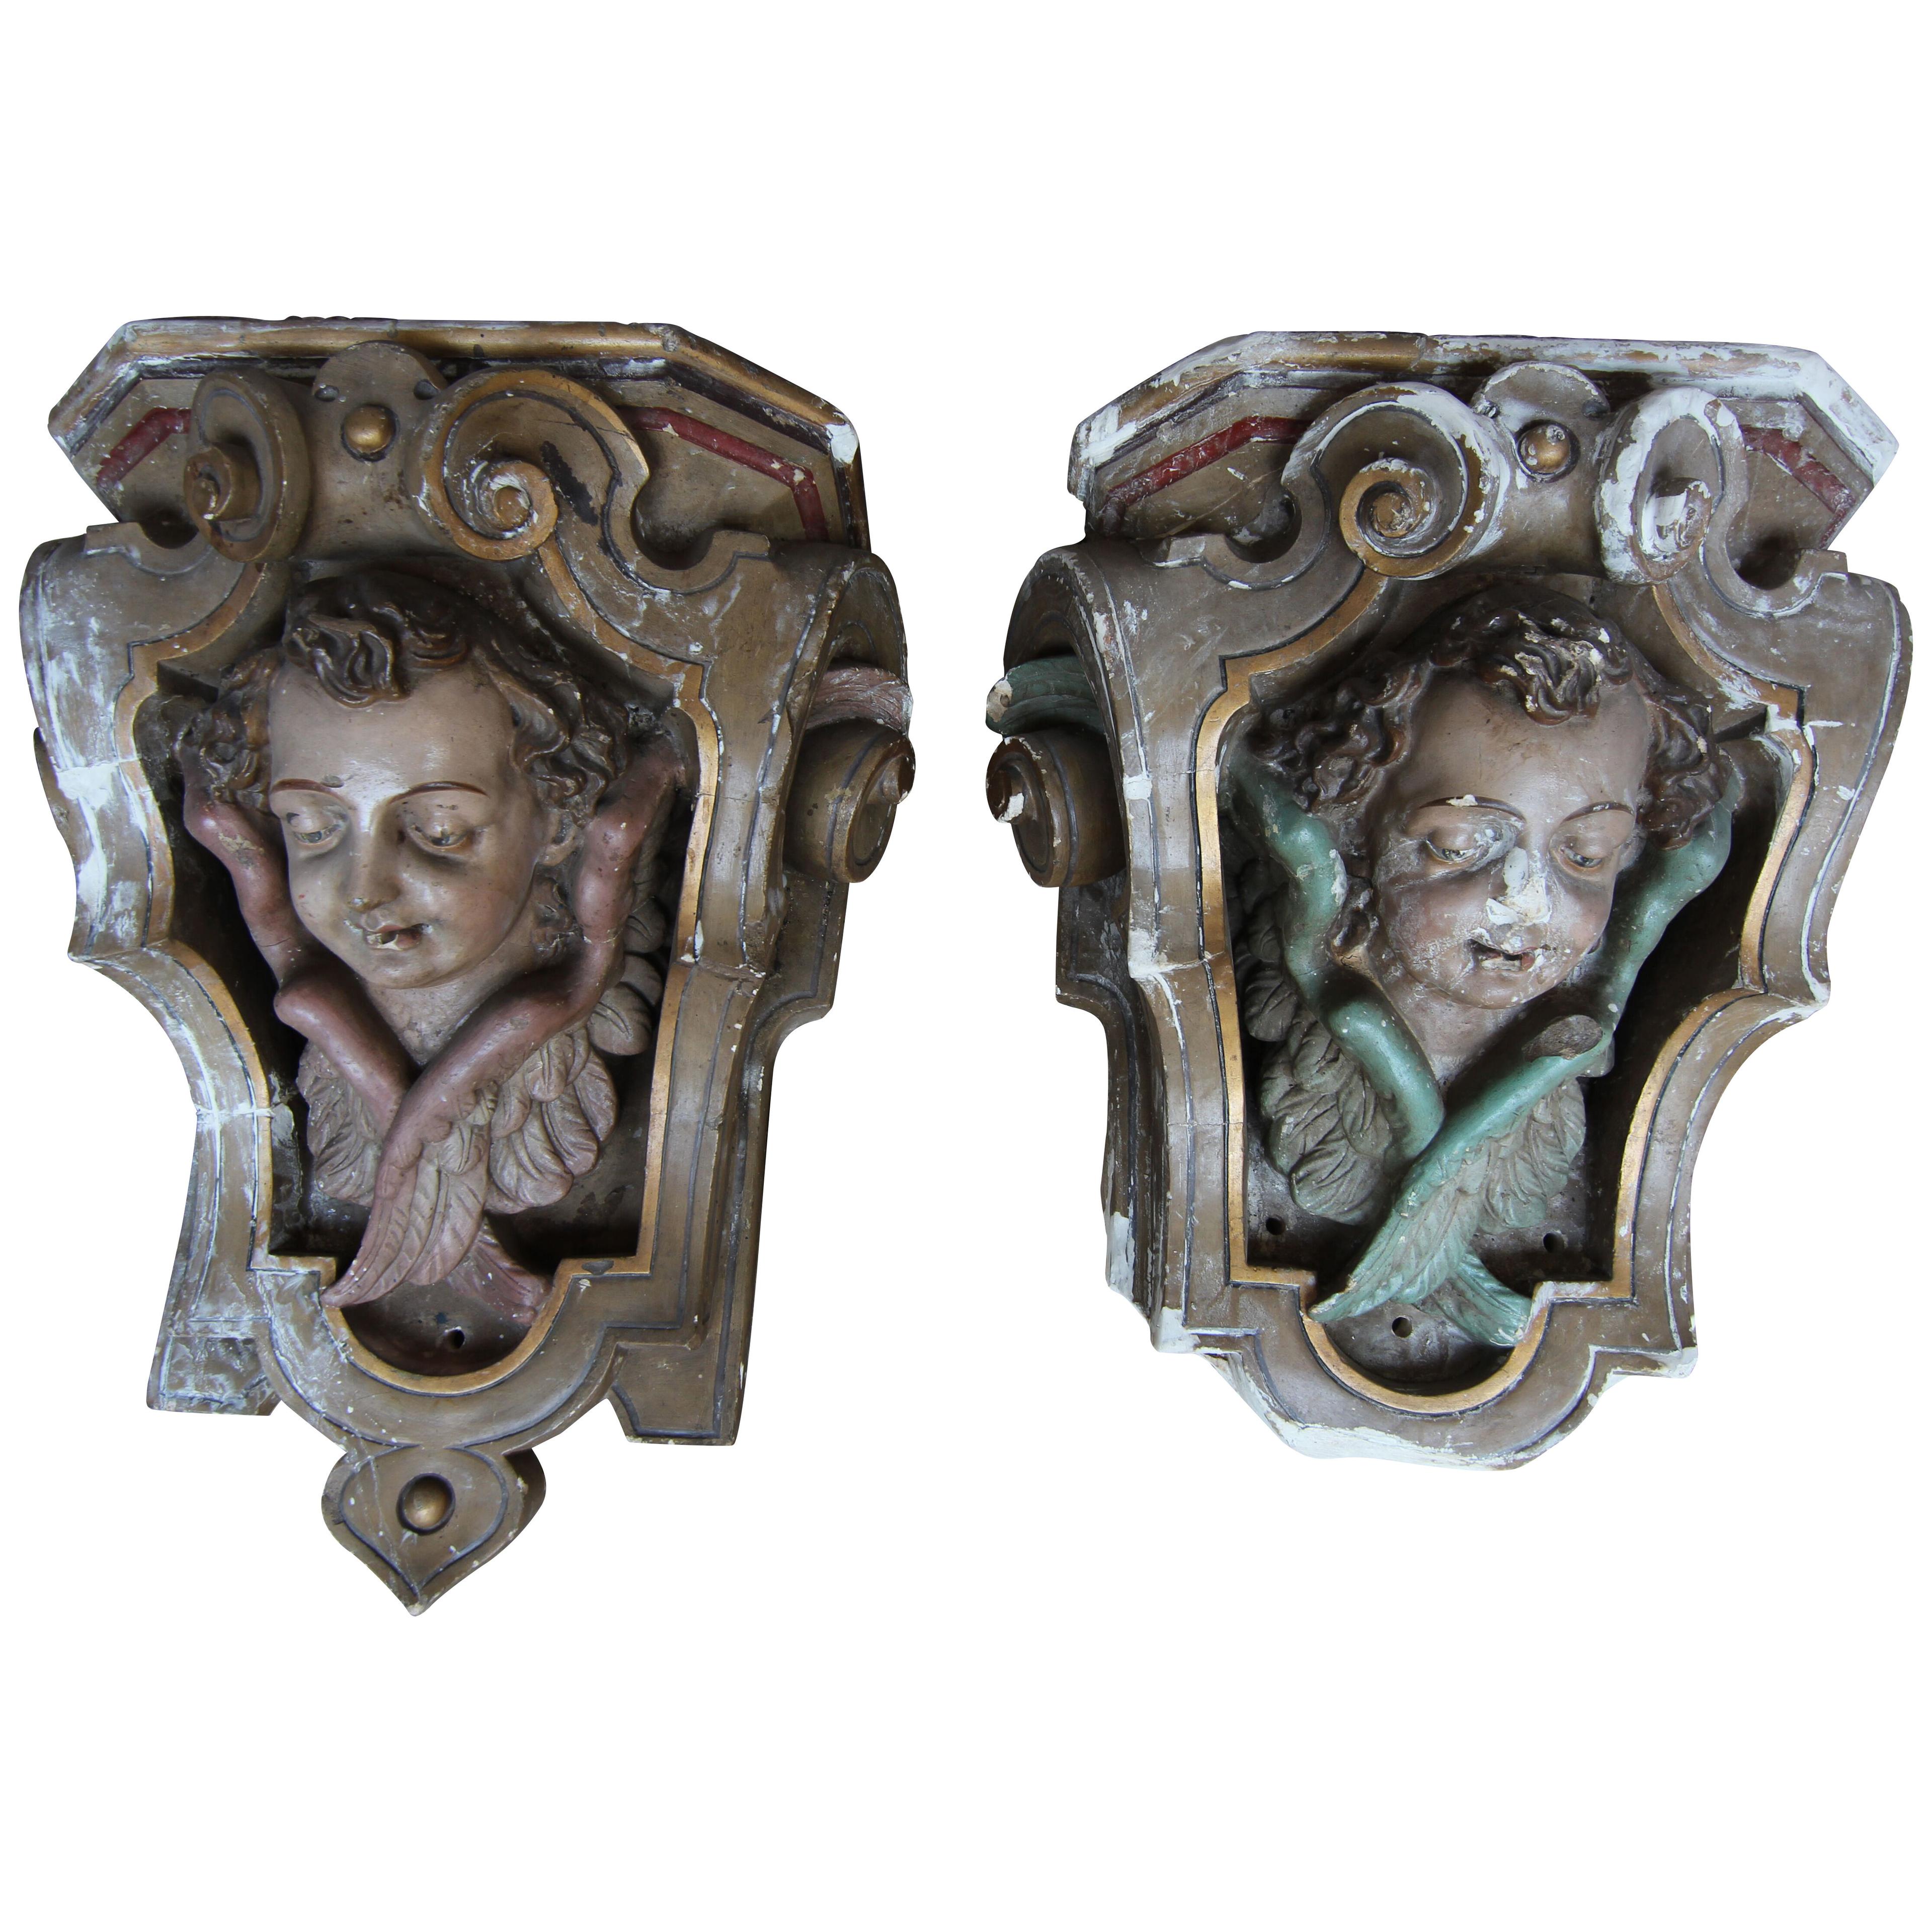 Large 19th Century Rococo Revival Putti Wall Brackets made of Plaster, Set of 2